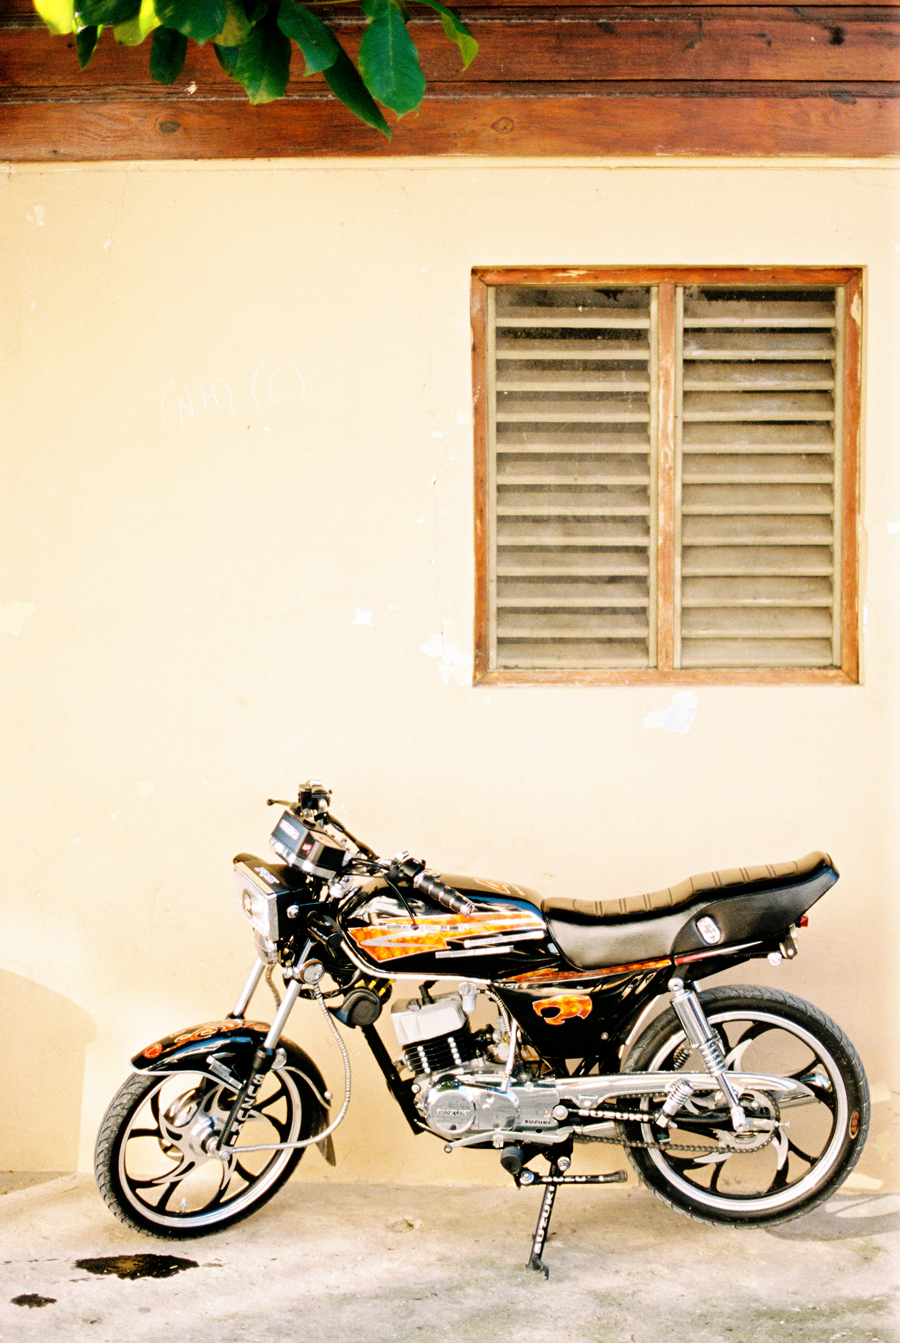 Motorcycle in the Dominican Republic